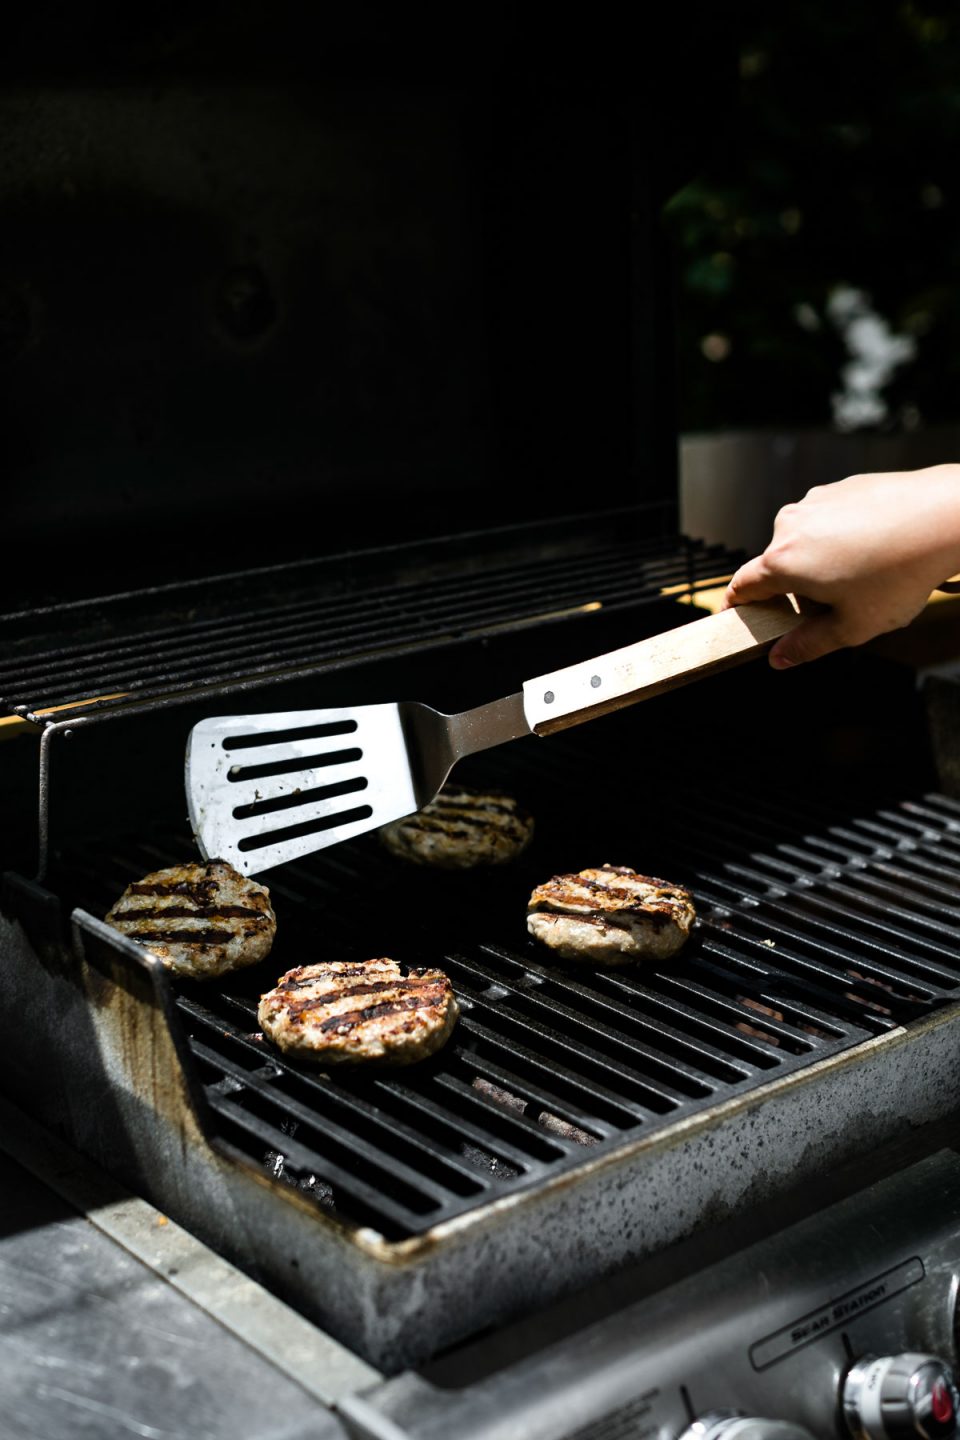 How to grill turkey burgers - 4 turkey burgers being cooked on a gas grill. A woman's hand reaches into the photo with a grill spatula to flip one of the burgers.